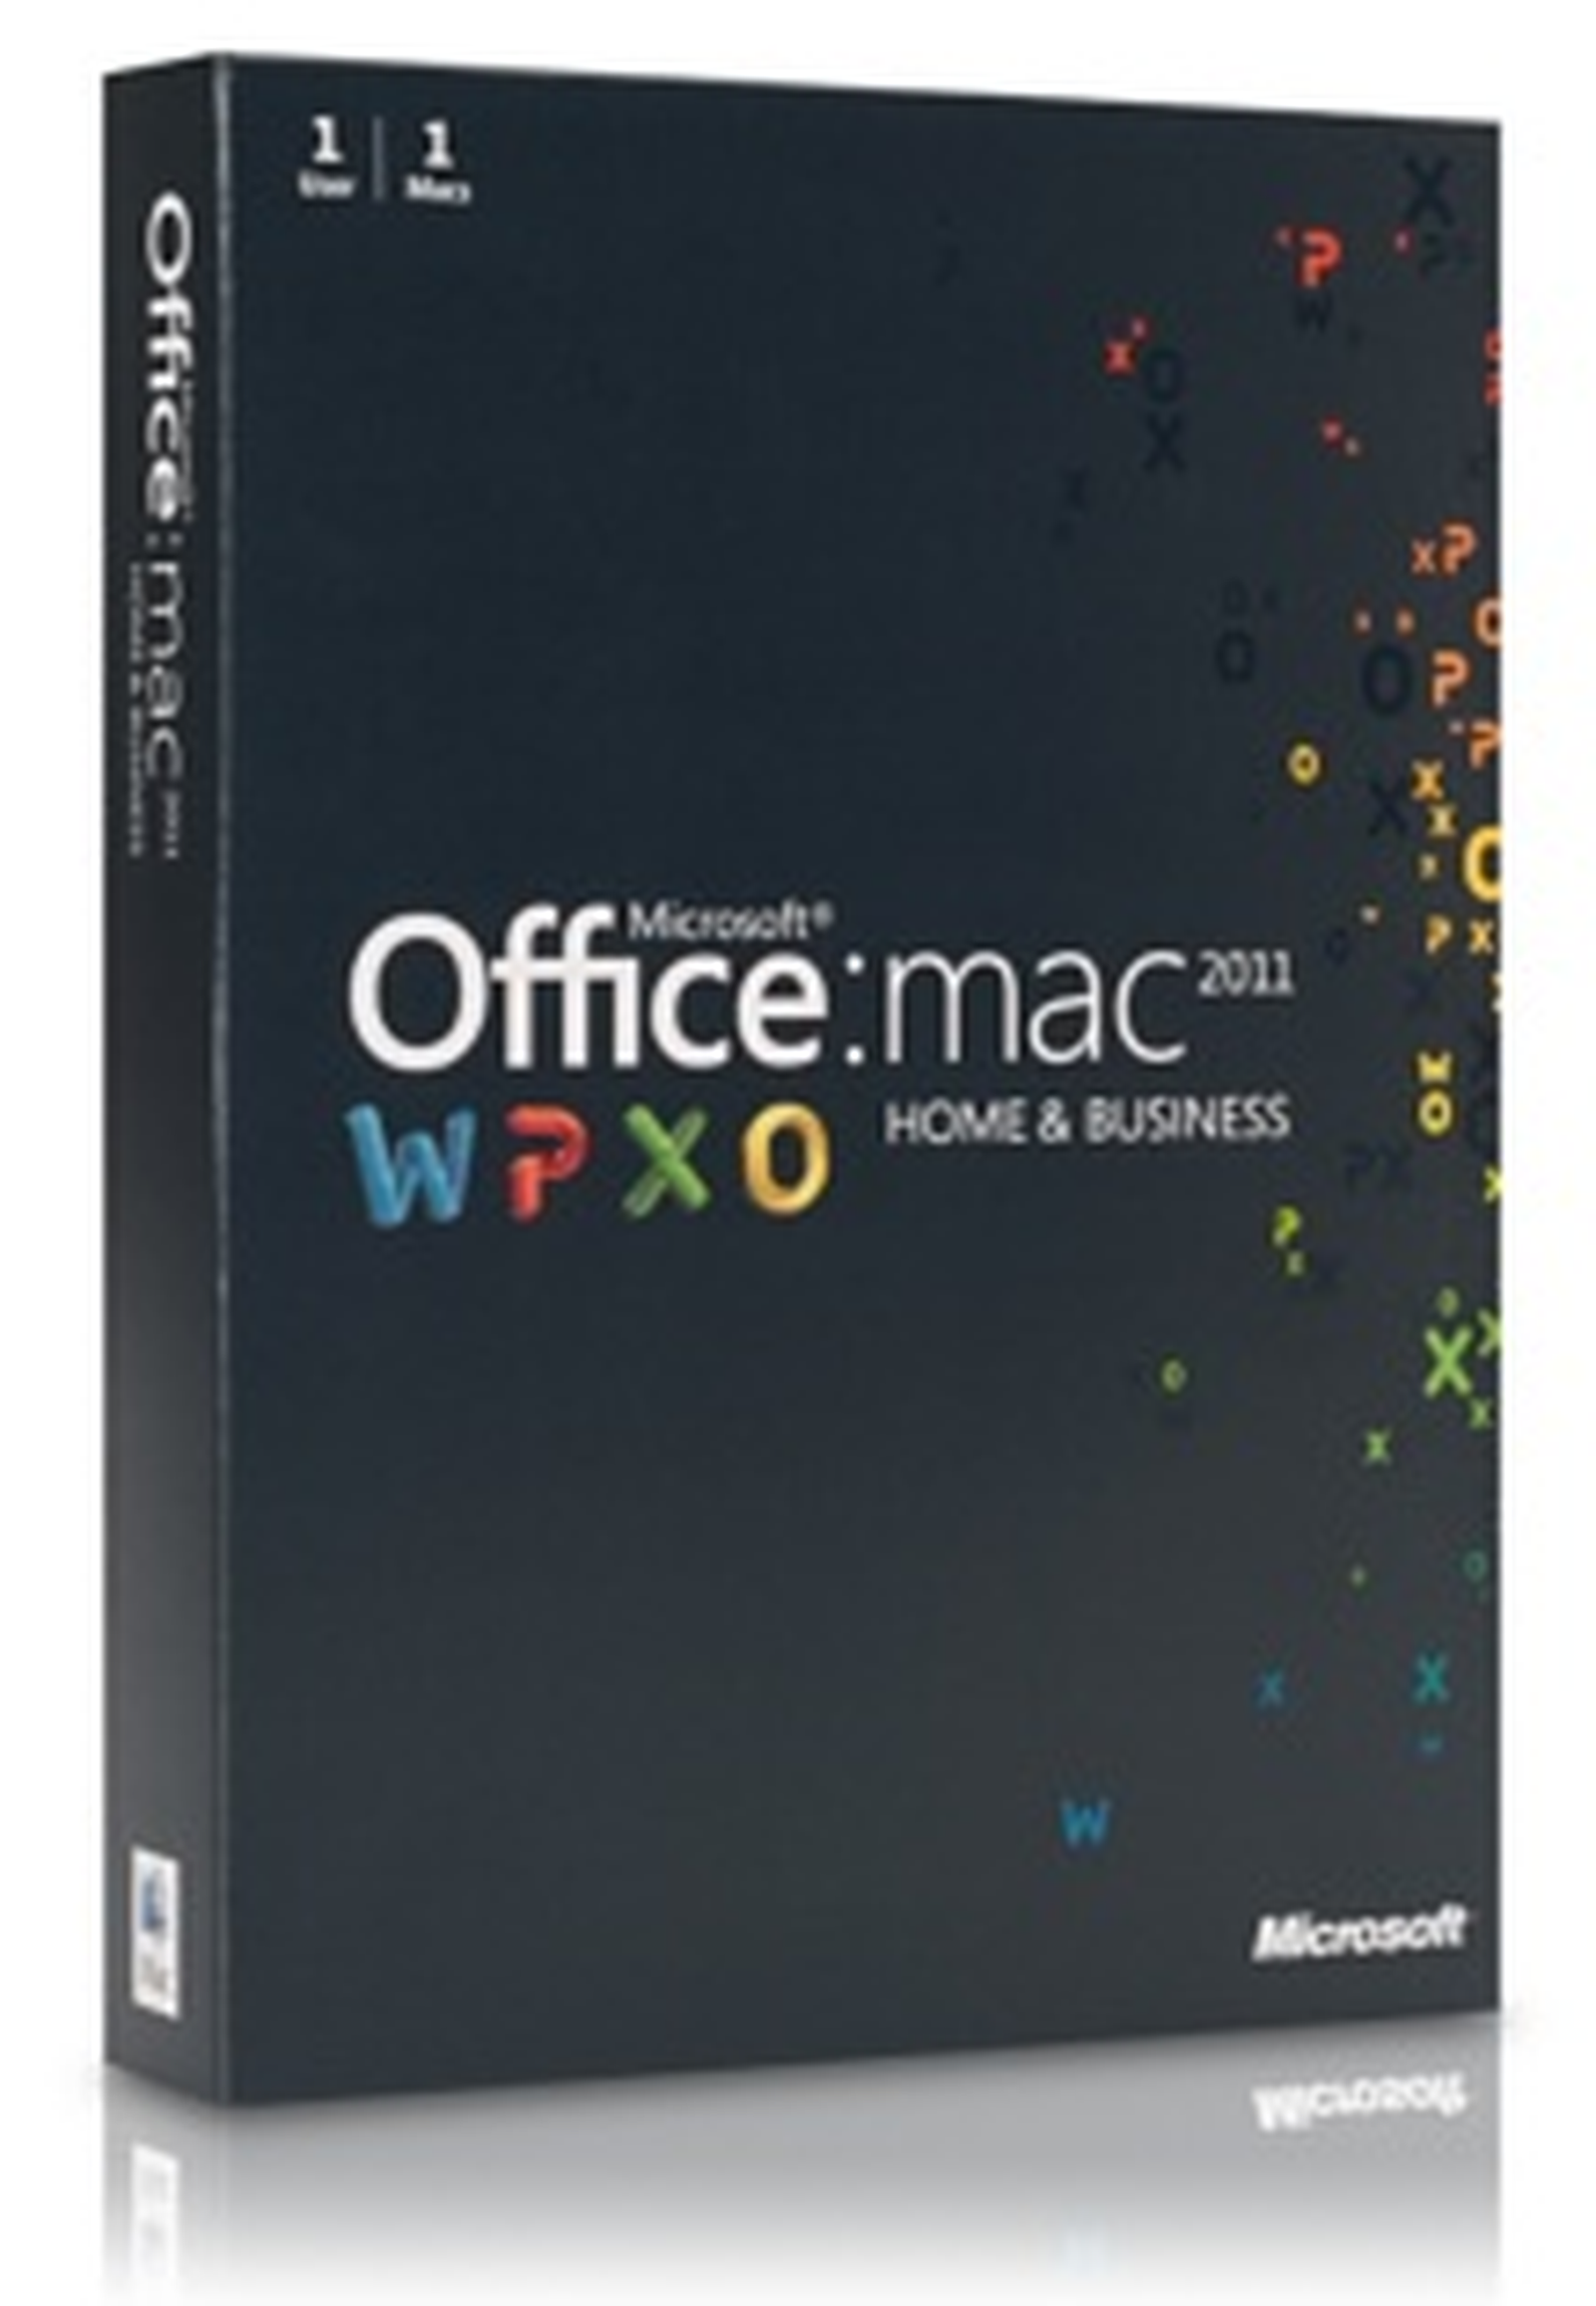 update microsoft office for mac 2008 to 2011